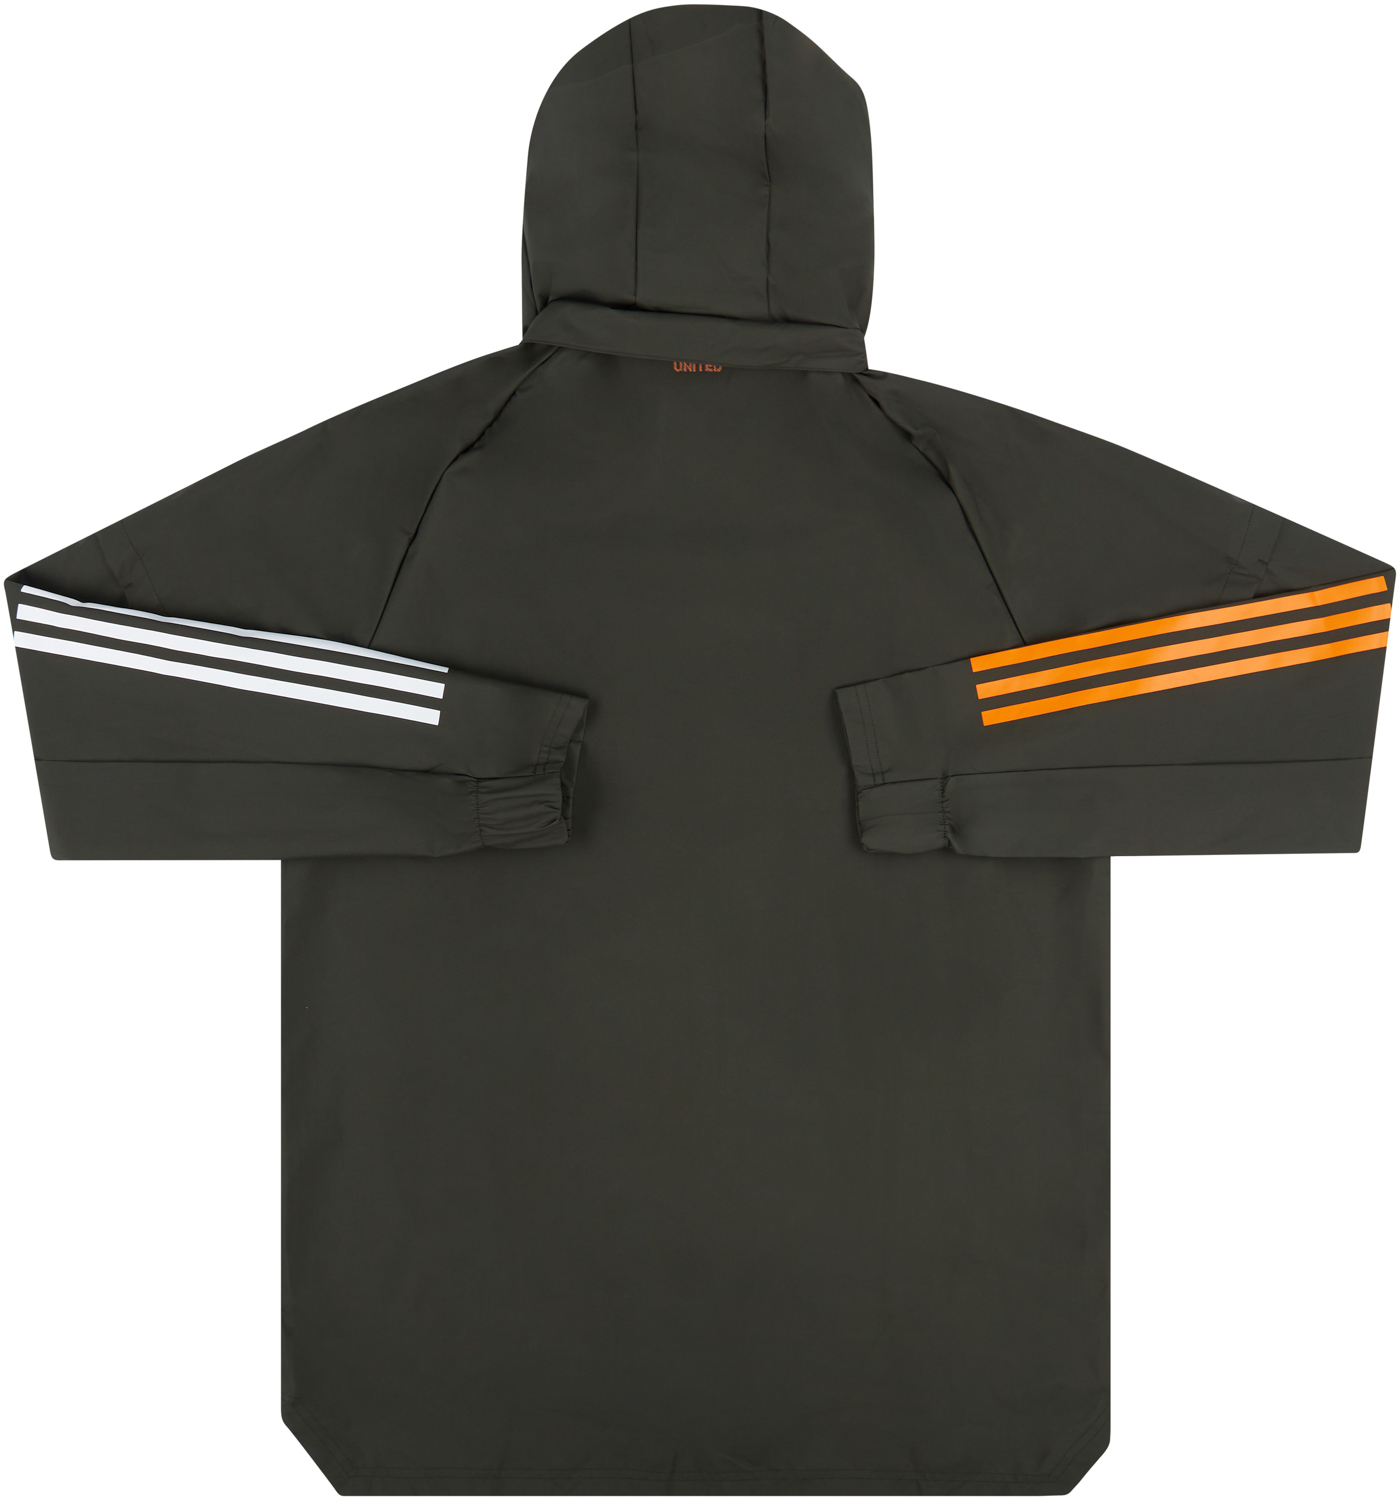 2020-21 Manchester United adidas All-Weather Jacket